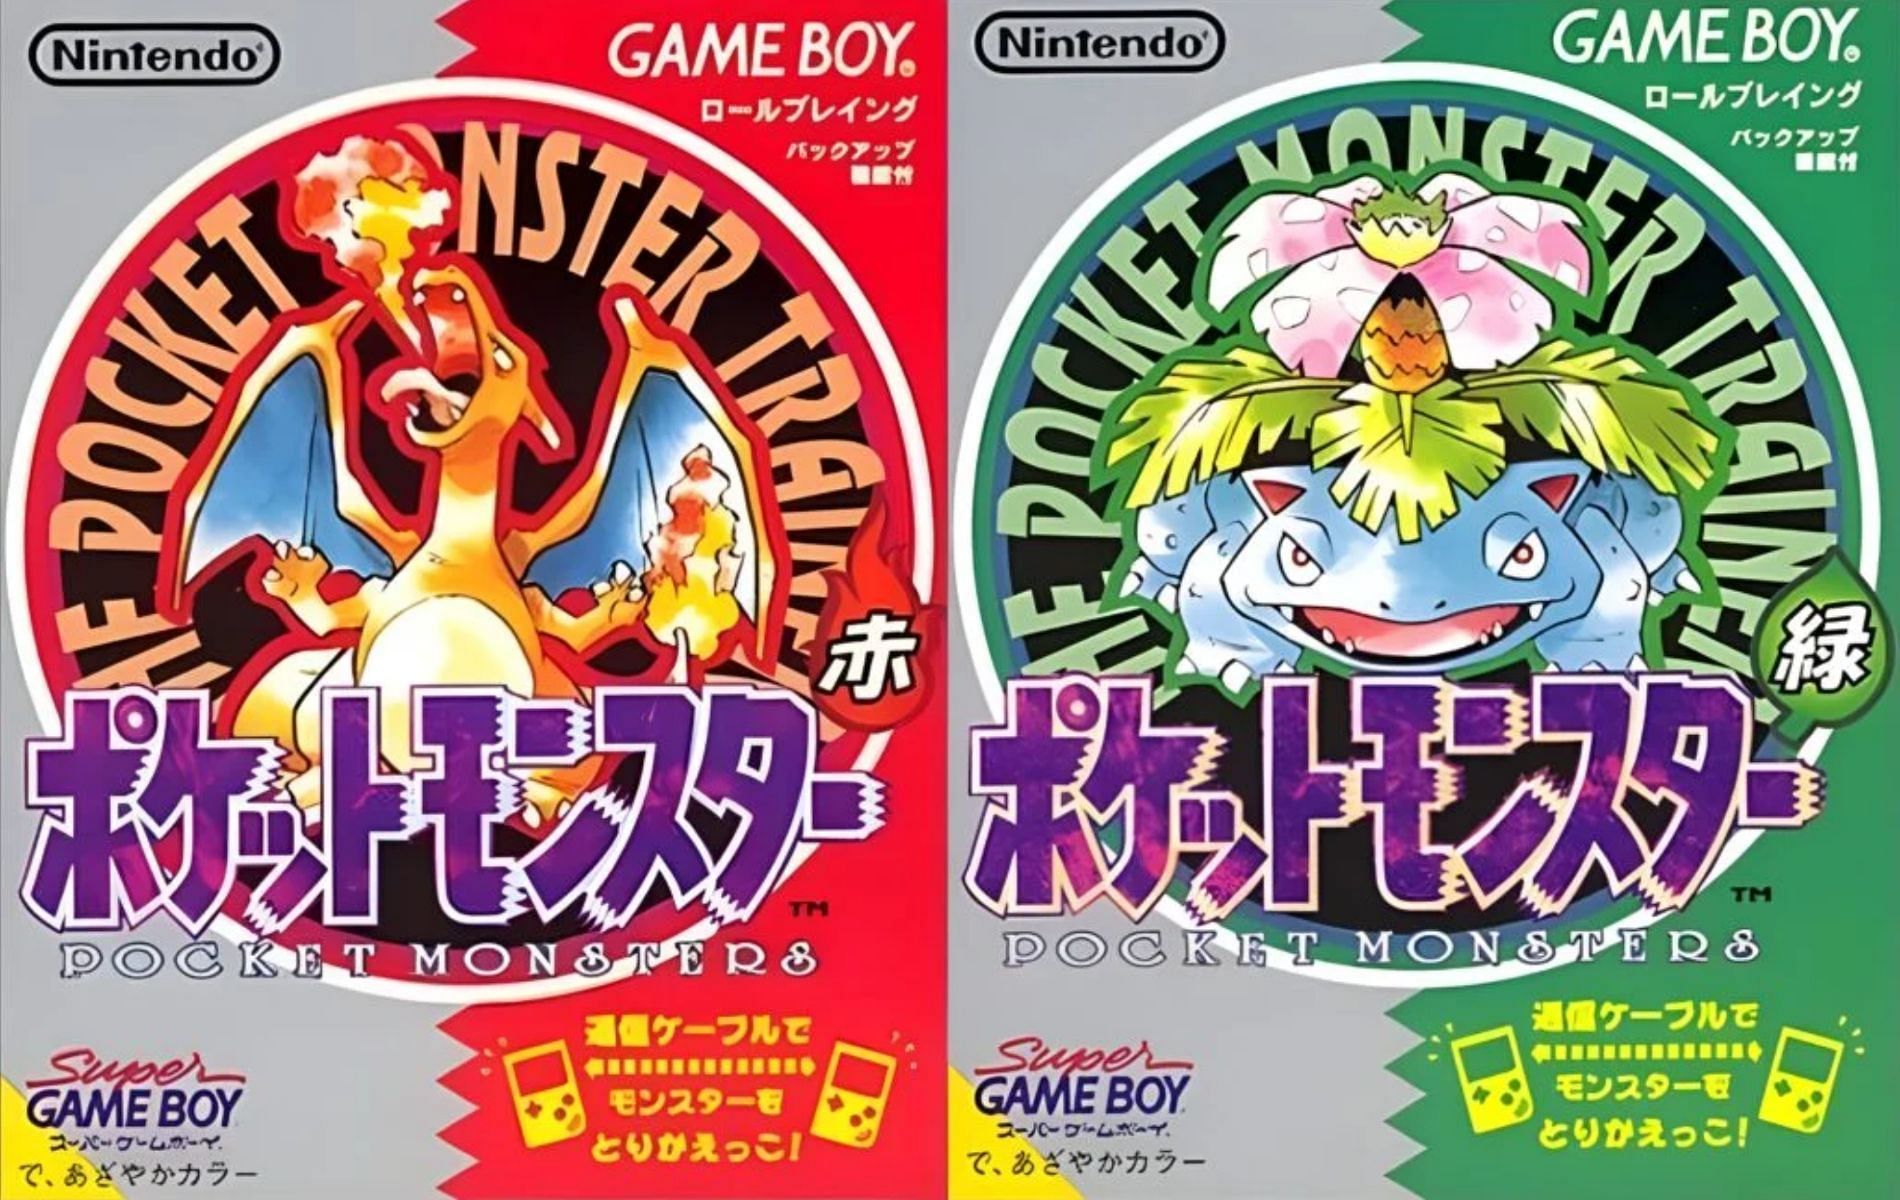 The Pokemon games were the first ever full-fledged monster-catching adventures (Image via Nintendo)